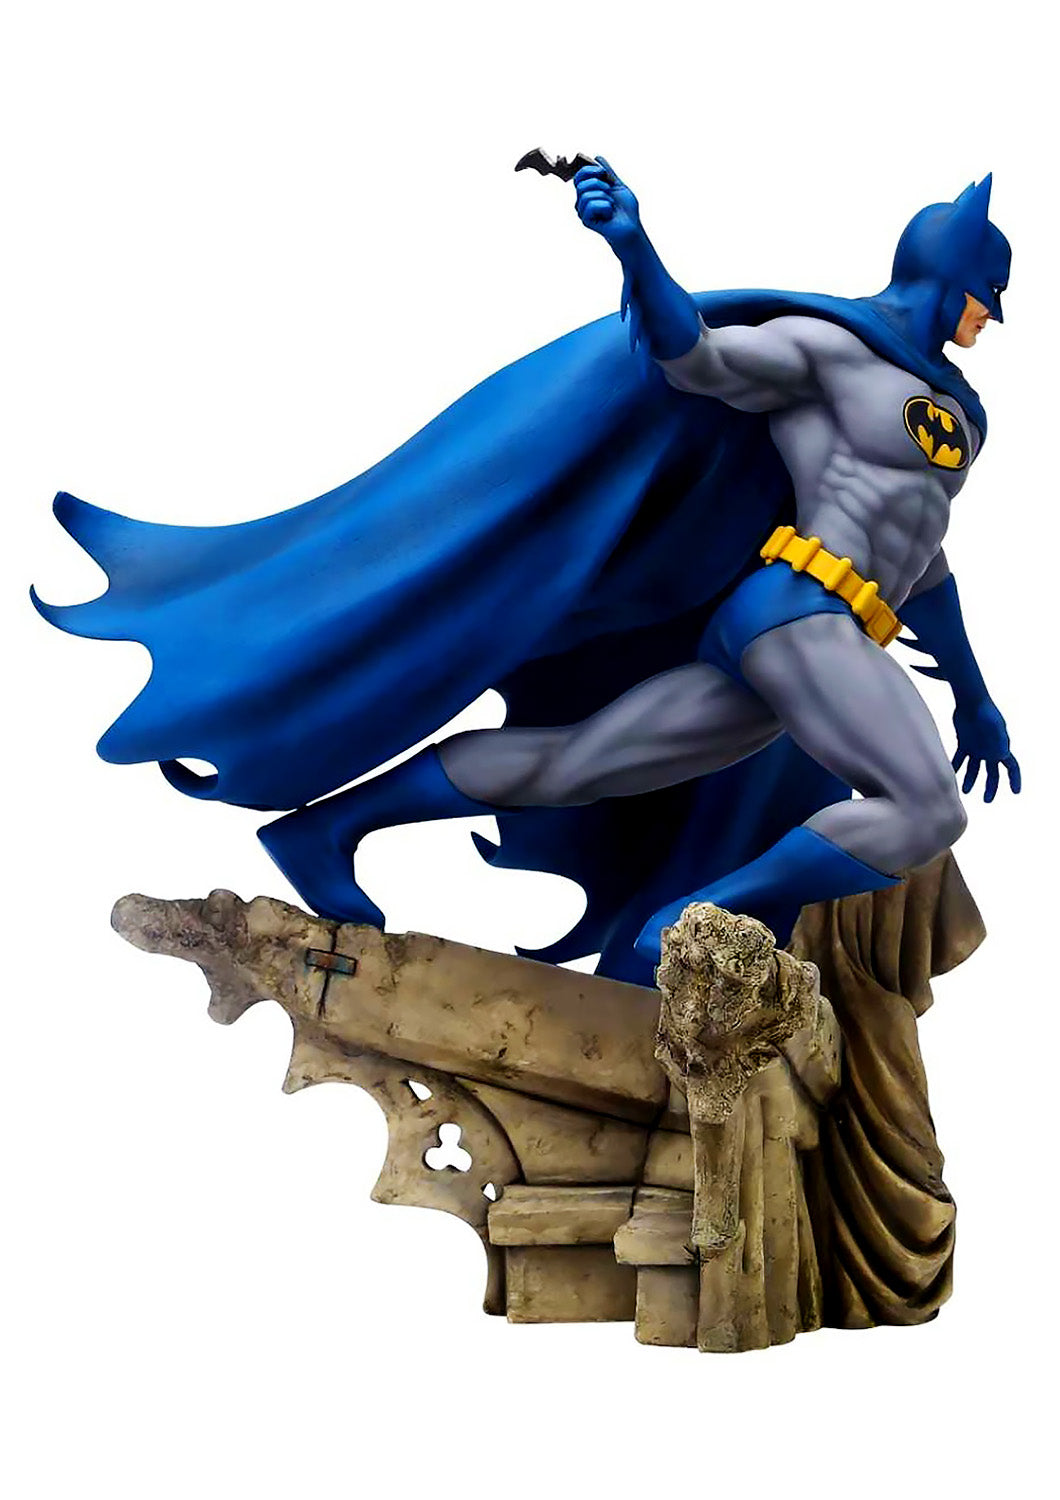 ENESCO GIFT GRAND JESTER COLLECTION BATMAN 1/6 SCALE - 6004981 - Anotoys Collectibles